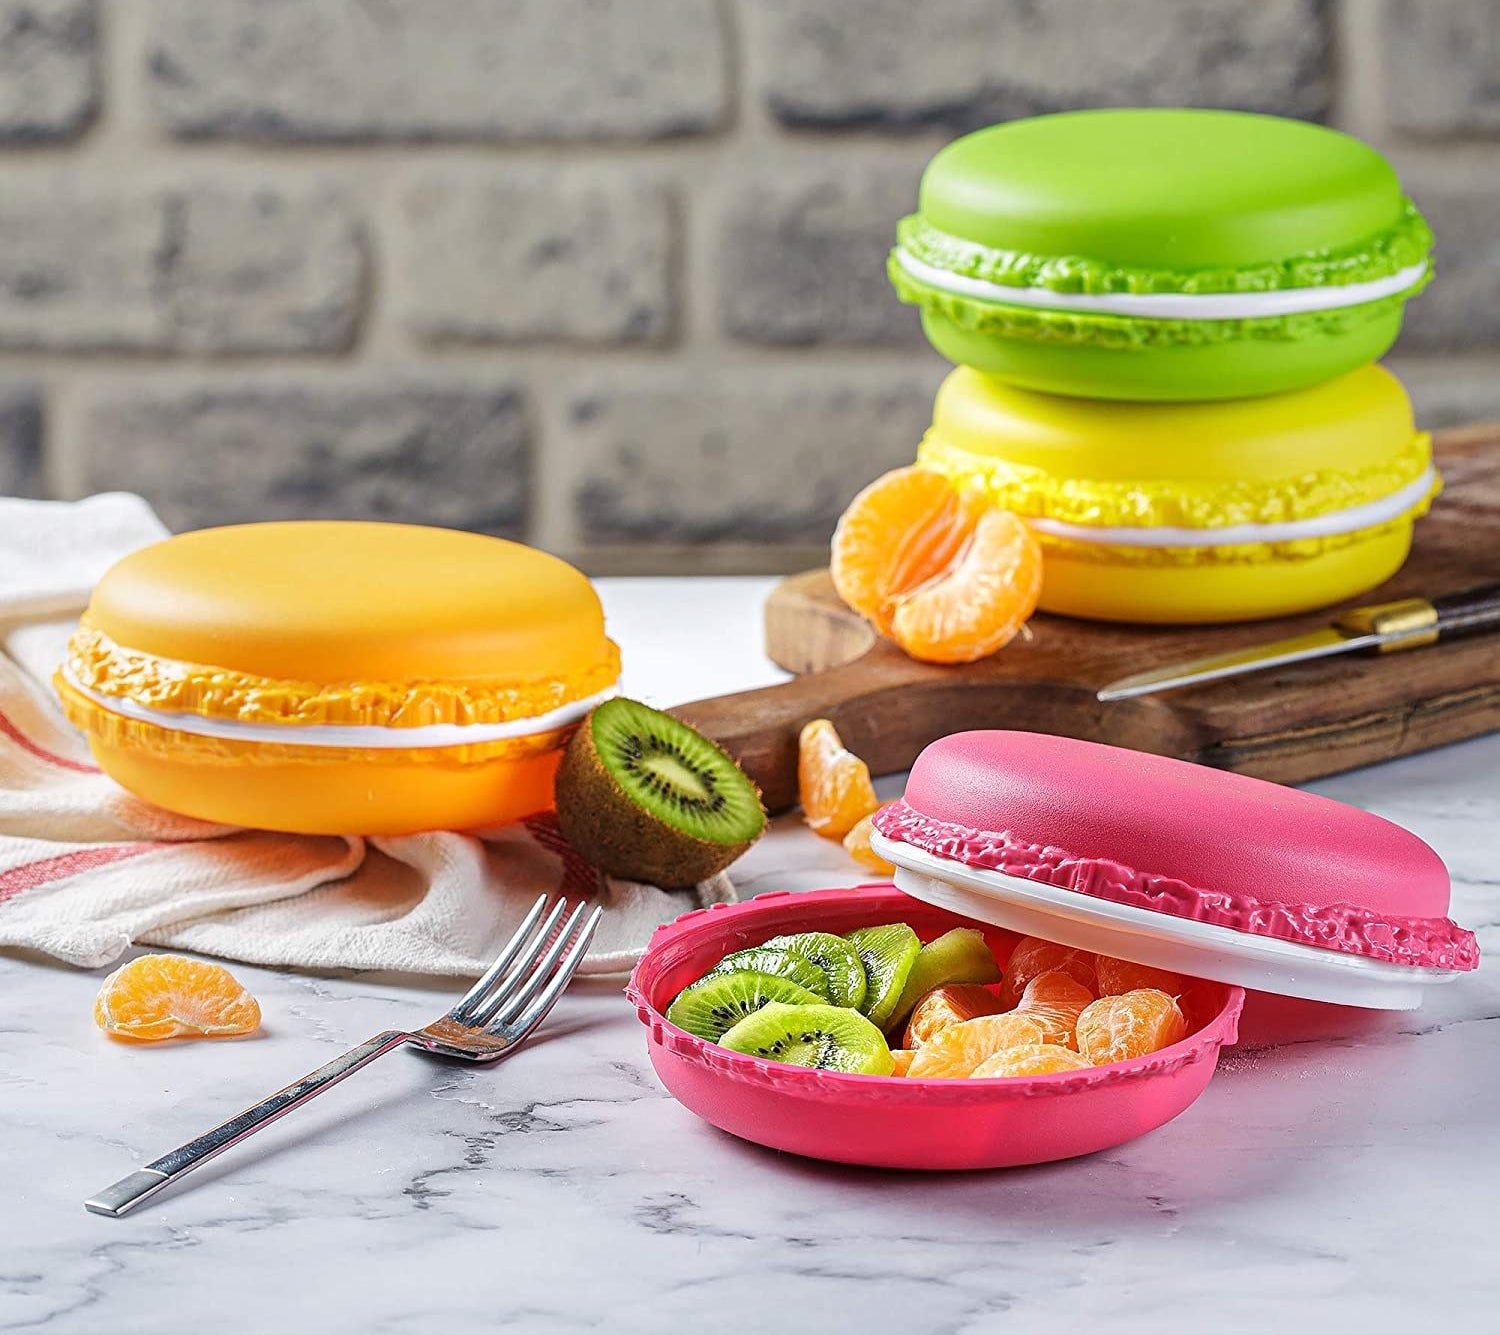 four macaron-shaped containers in orange, yellow, green, and pink